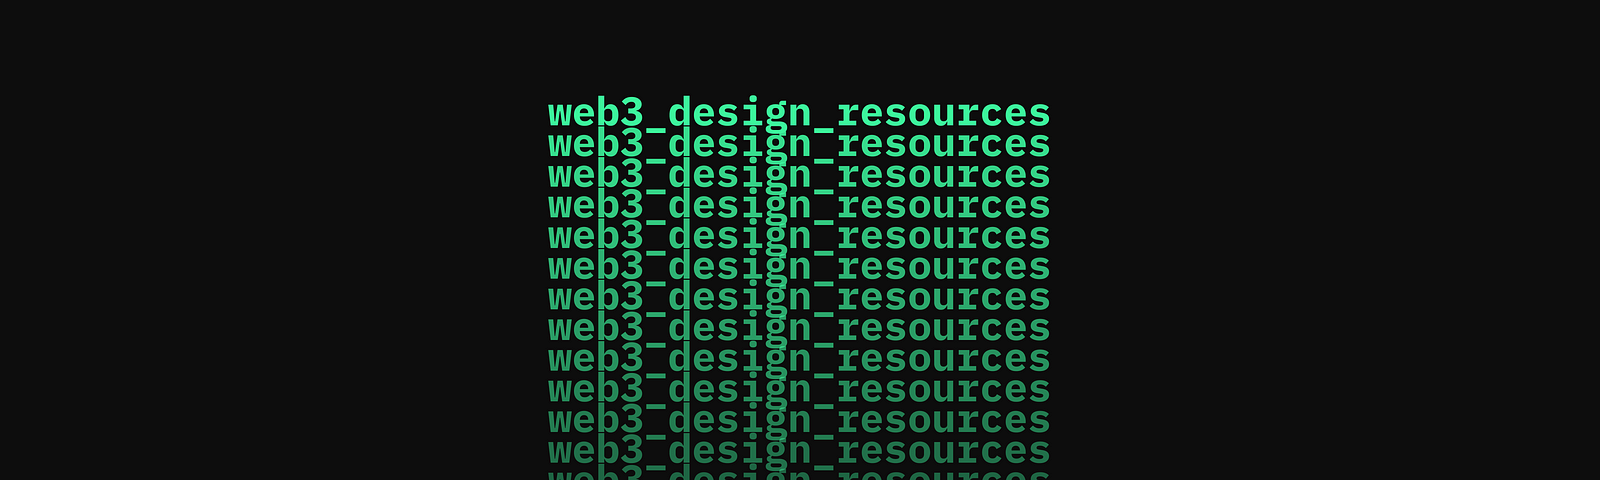 Black background, with green text saying ‘web 3 design resources’ over qand over again, getting progressively darker. A cursor hovers over ‘web 3 design resources’ and a tooltip looking box says ‘Show me da good stuff haha lmao”